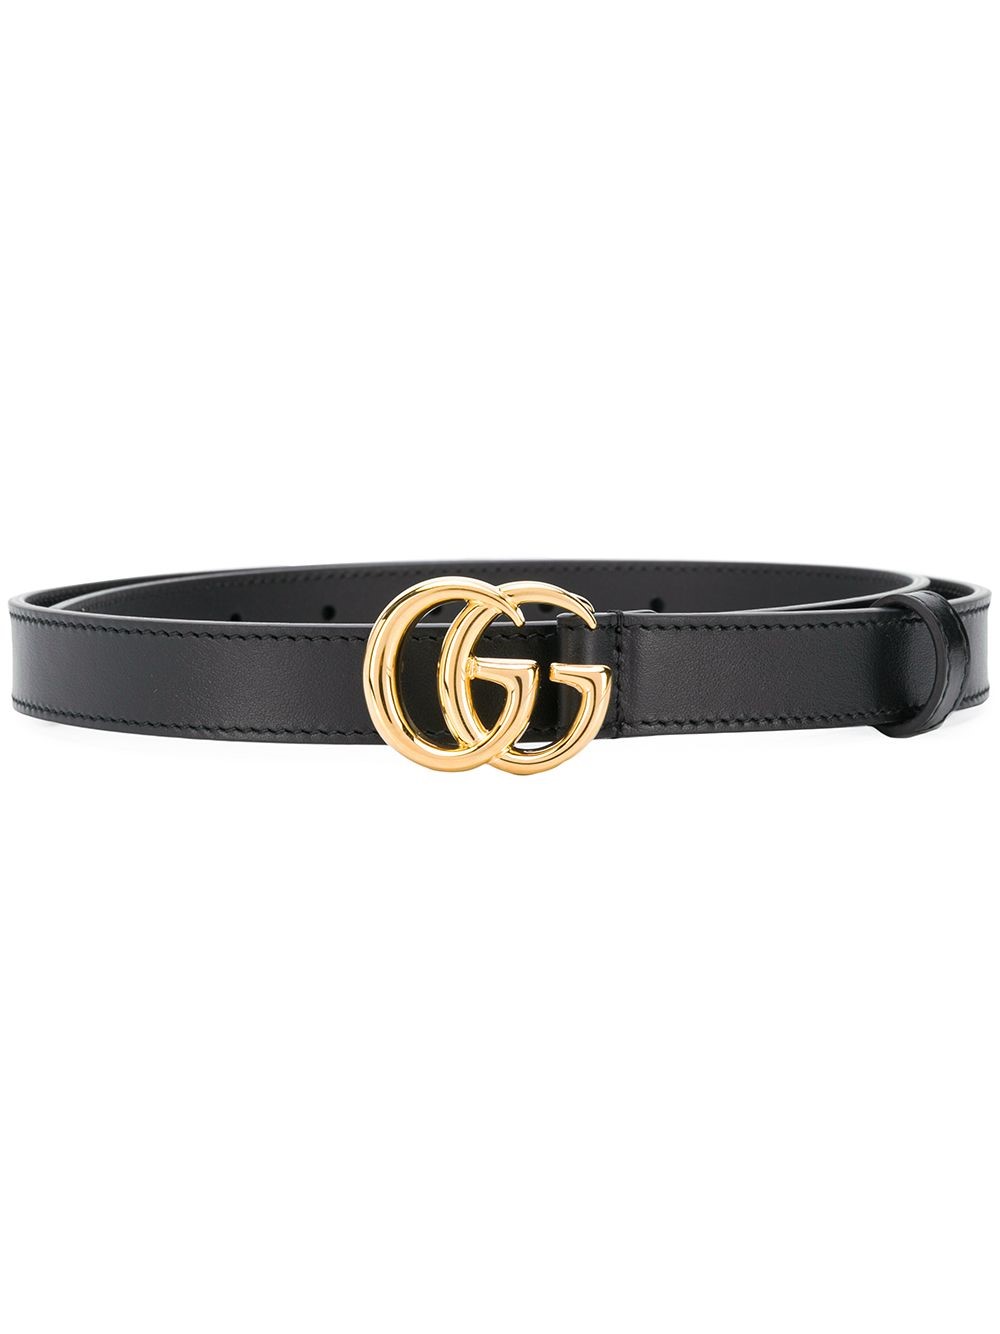 gucci GG MARMONT BELT available on montiboutique.com - 33311